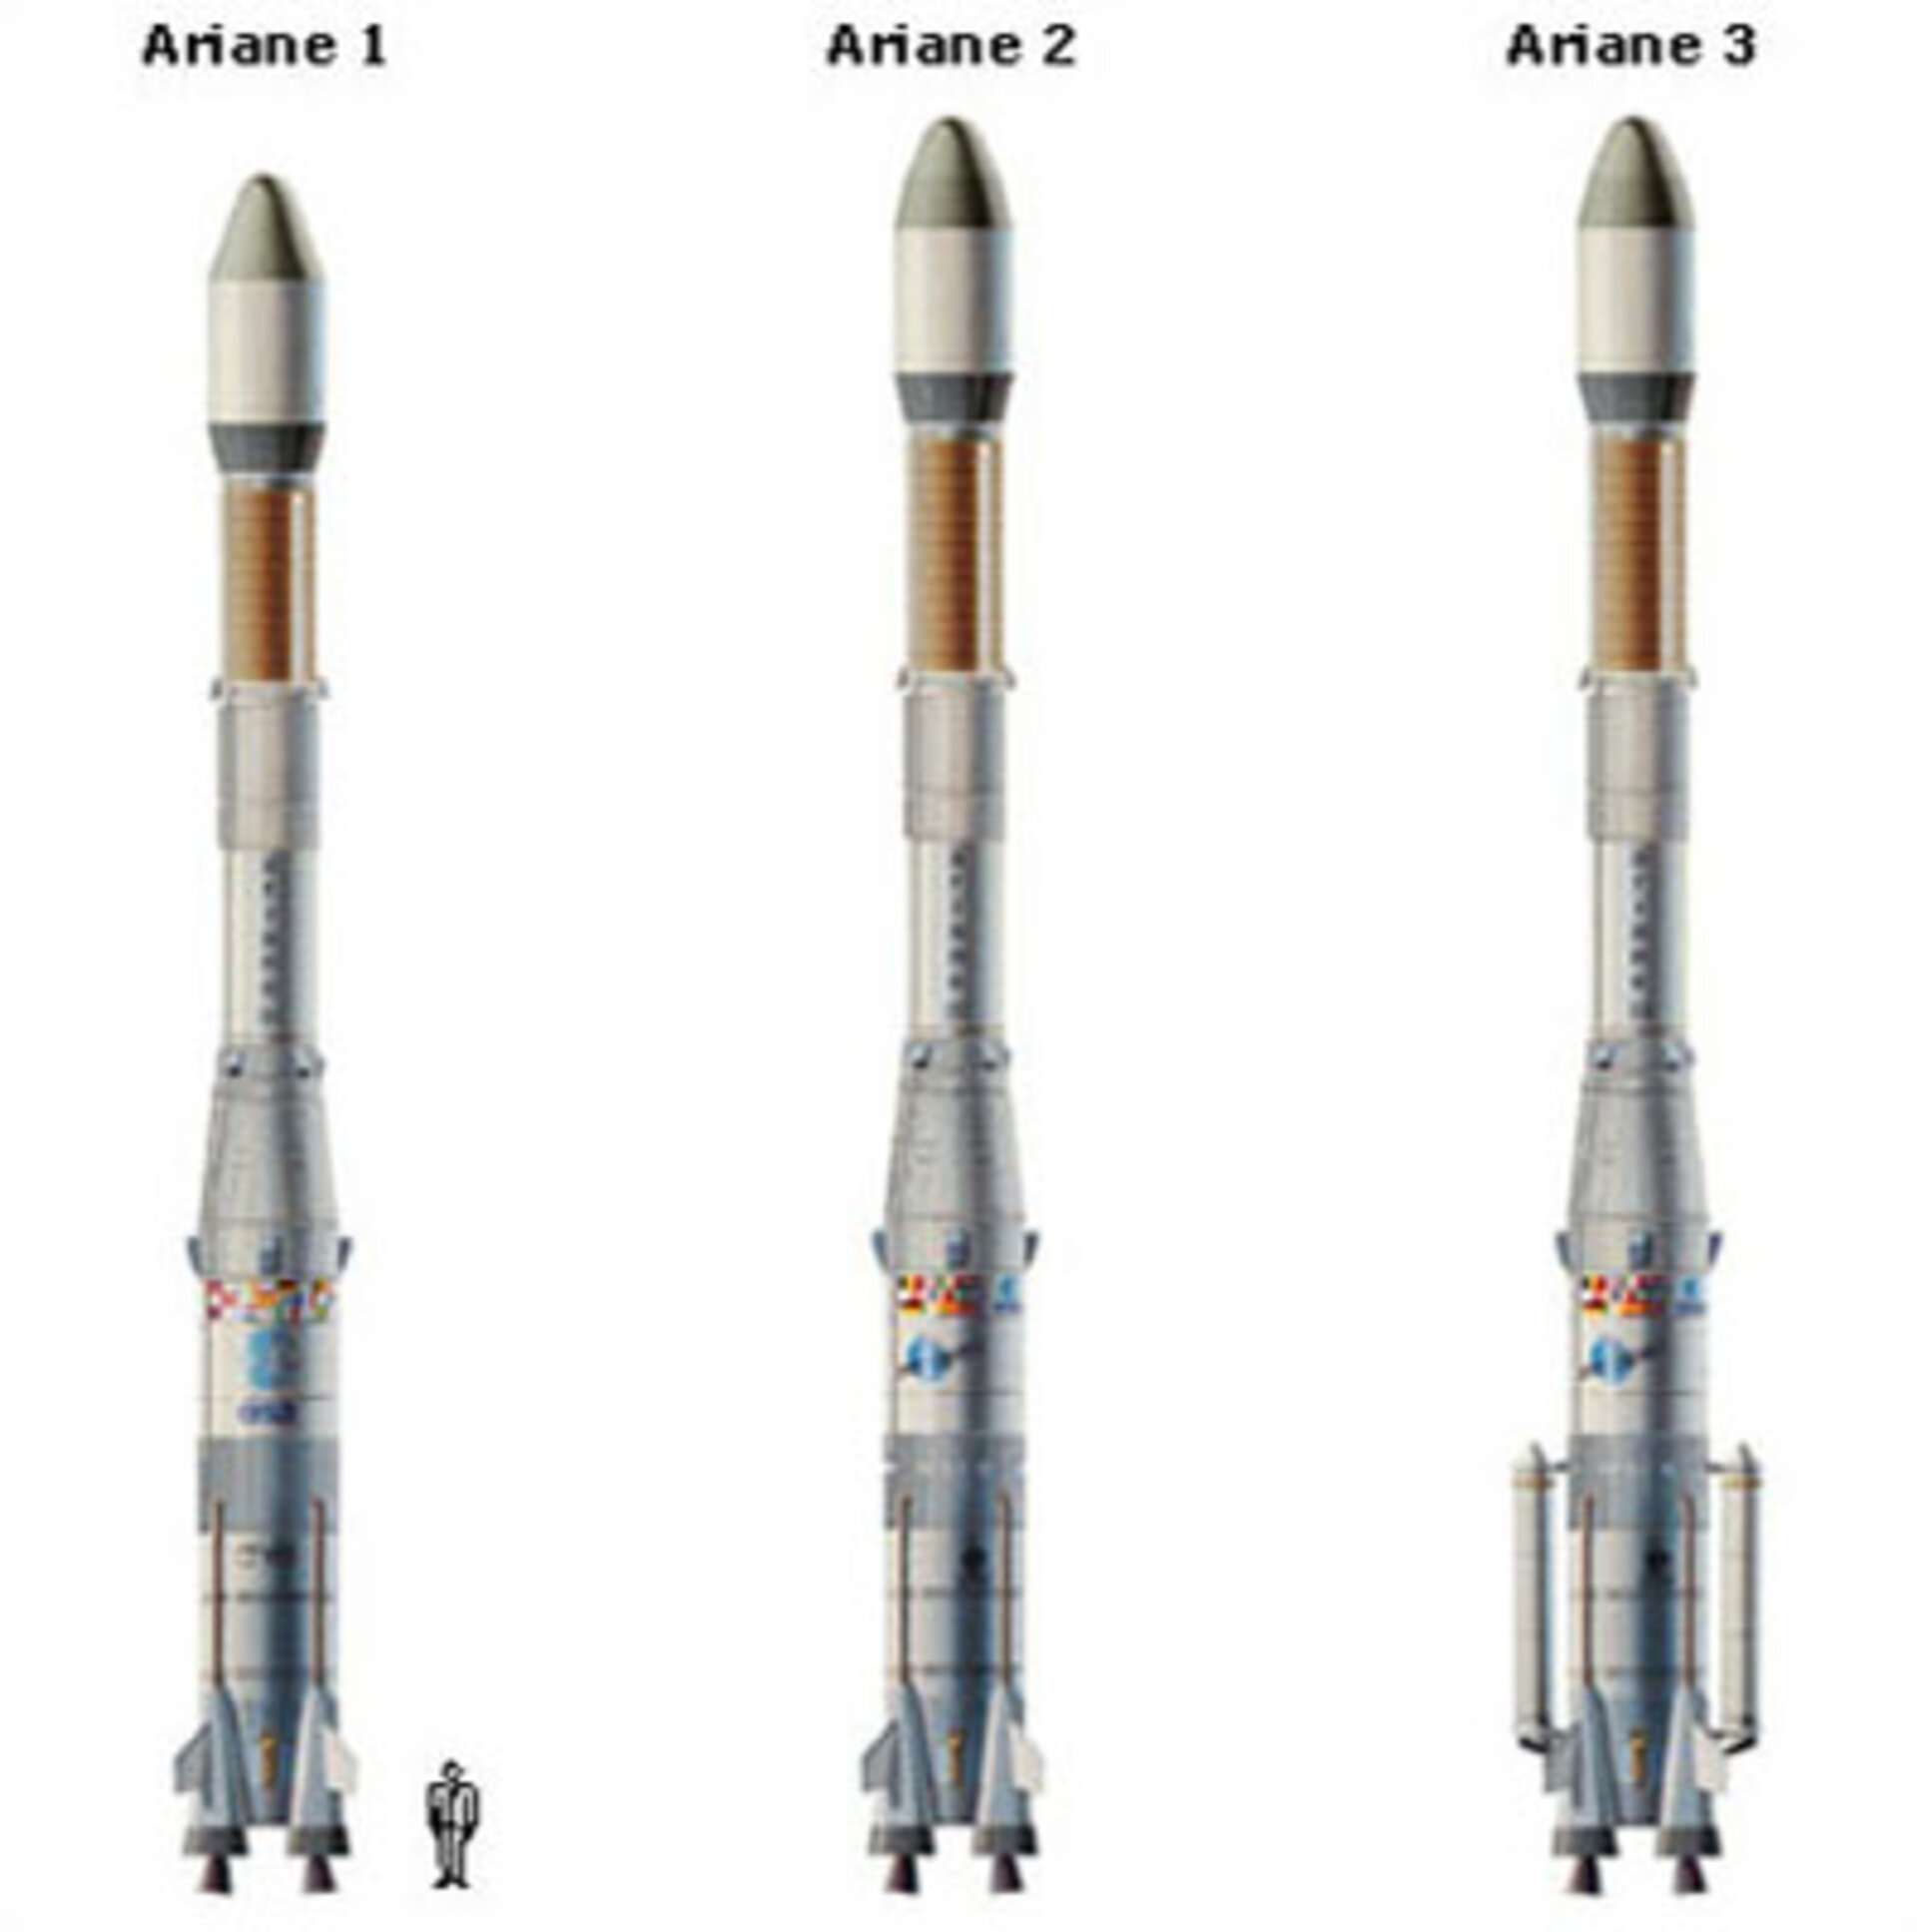 The first Ariane launchers